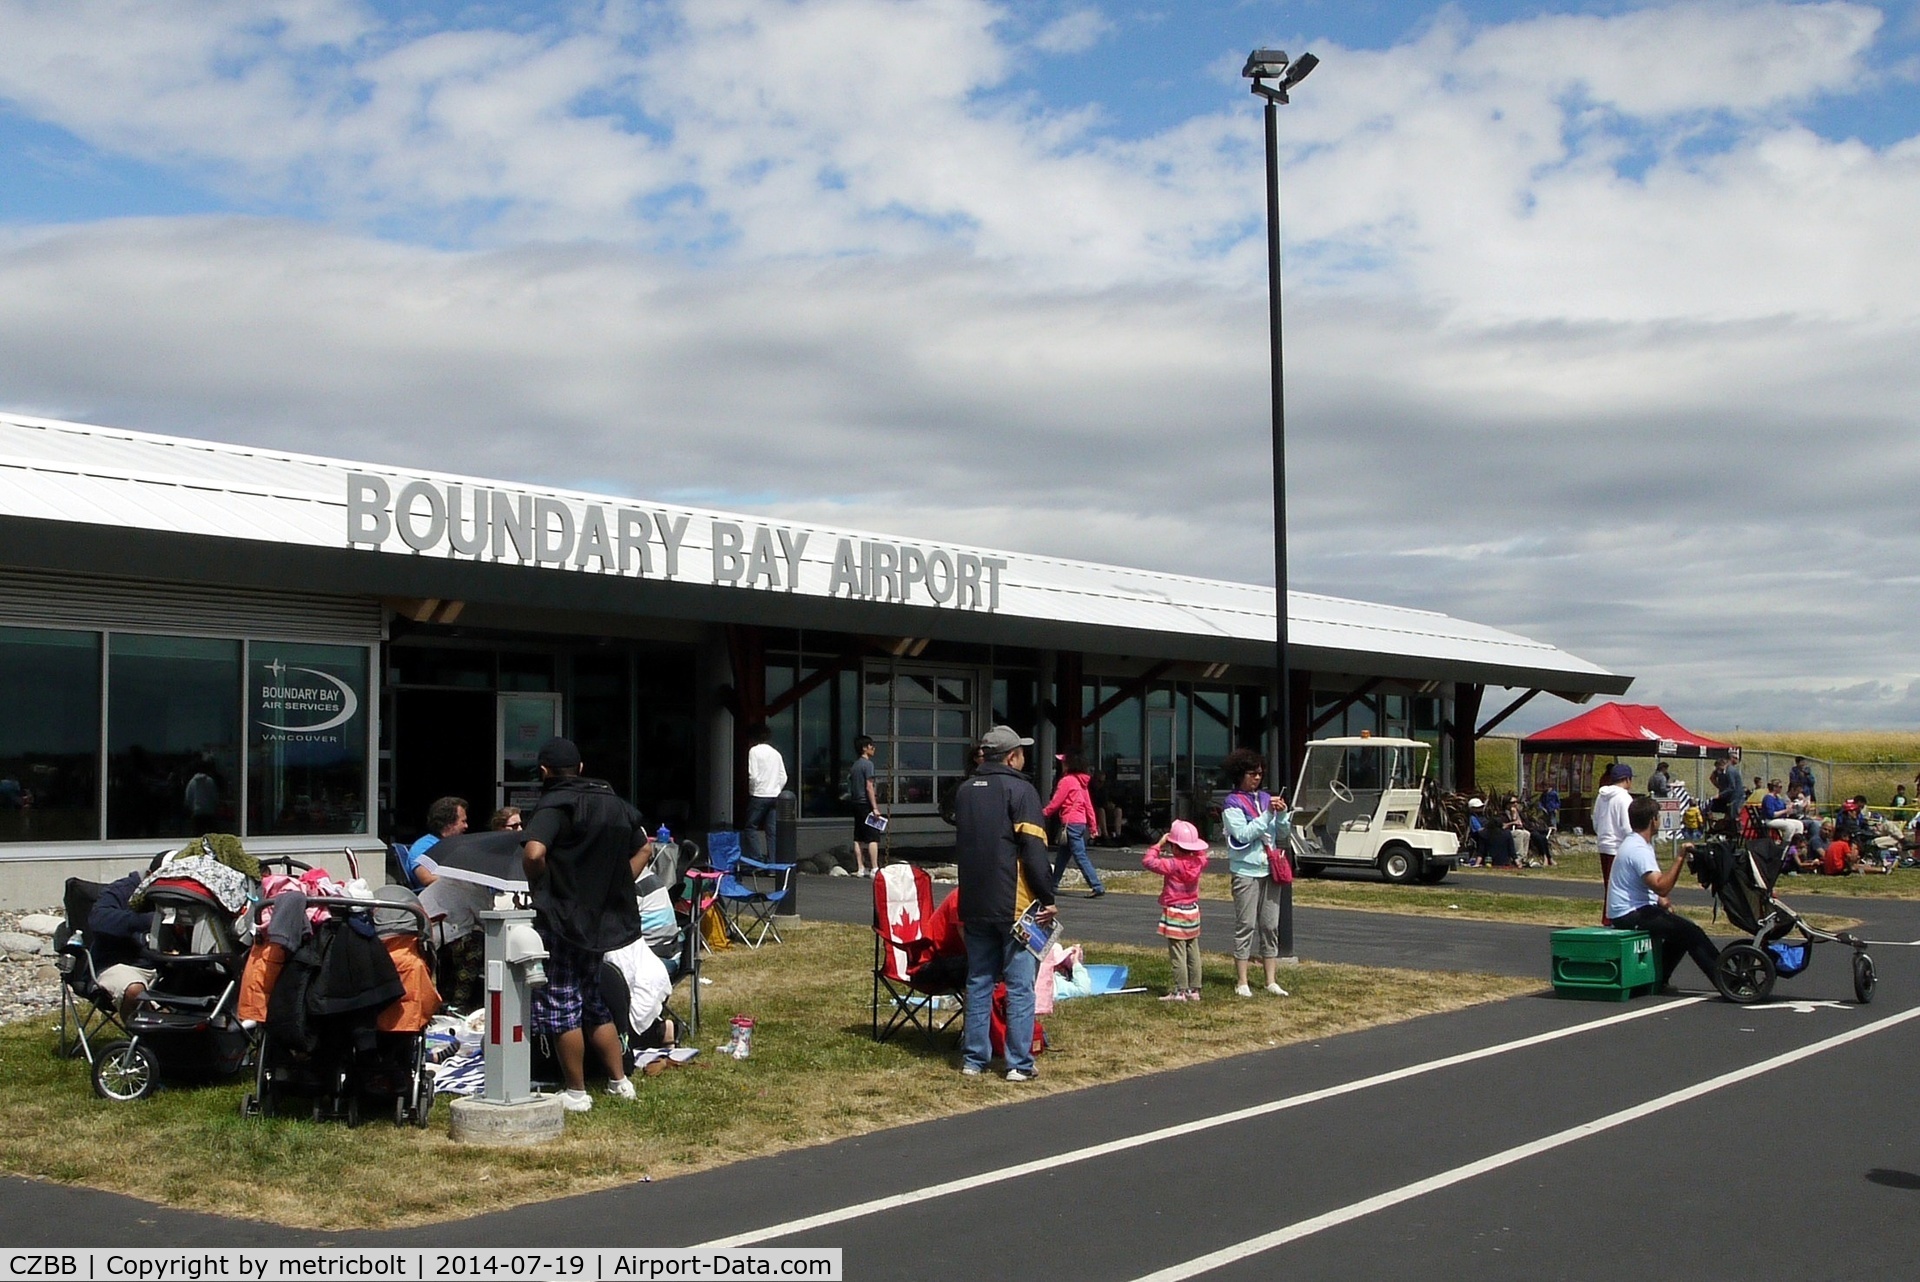 Boundry Bay Airport, Boundry Bay Canada (CZBB) - Boundary Bay Airport(YDT) rampside for the Boundary Bay Airshow 2014